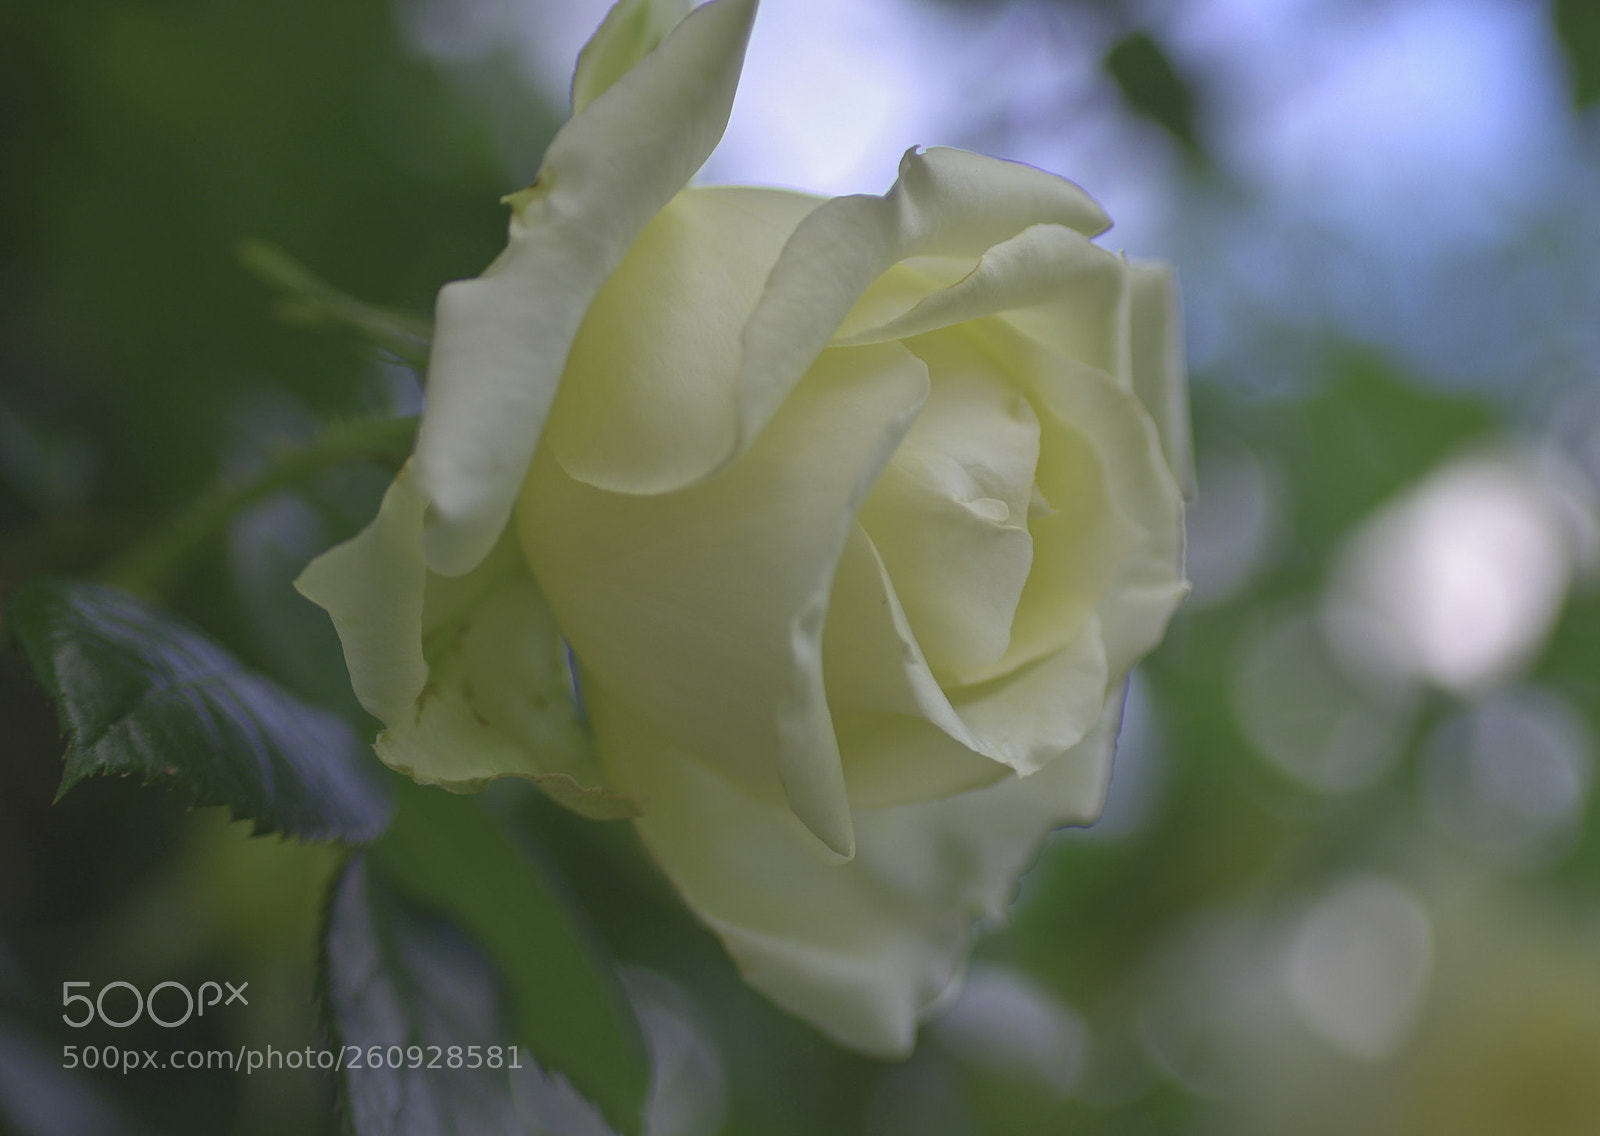 Pentax K-30 sample photo. The queen photography